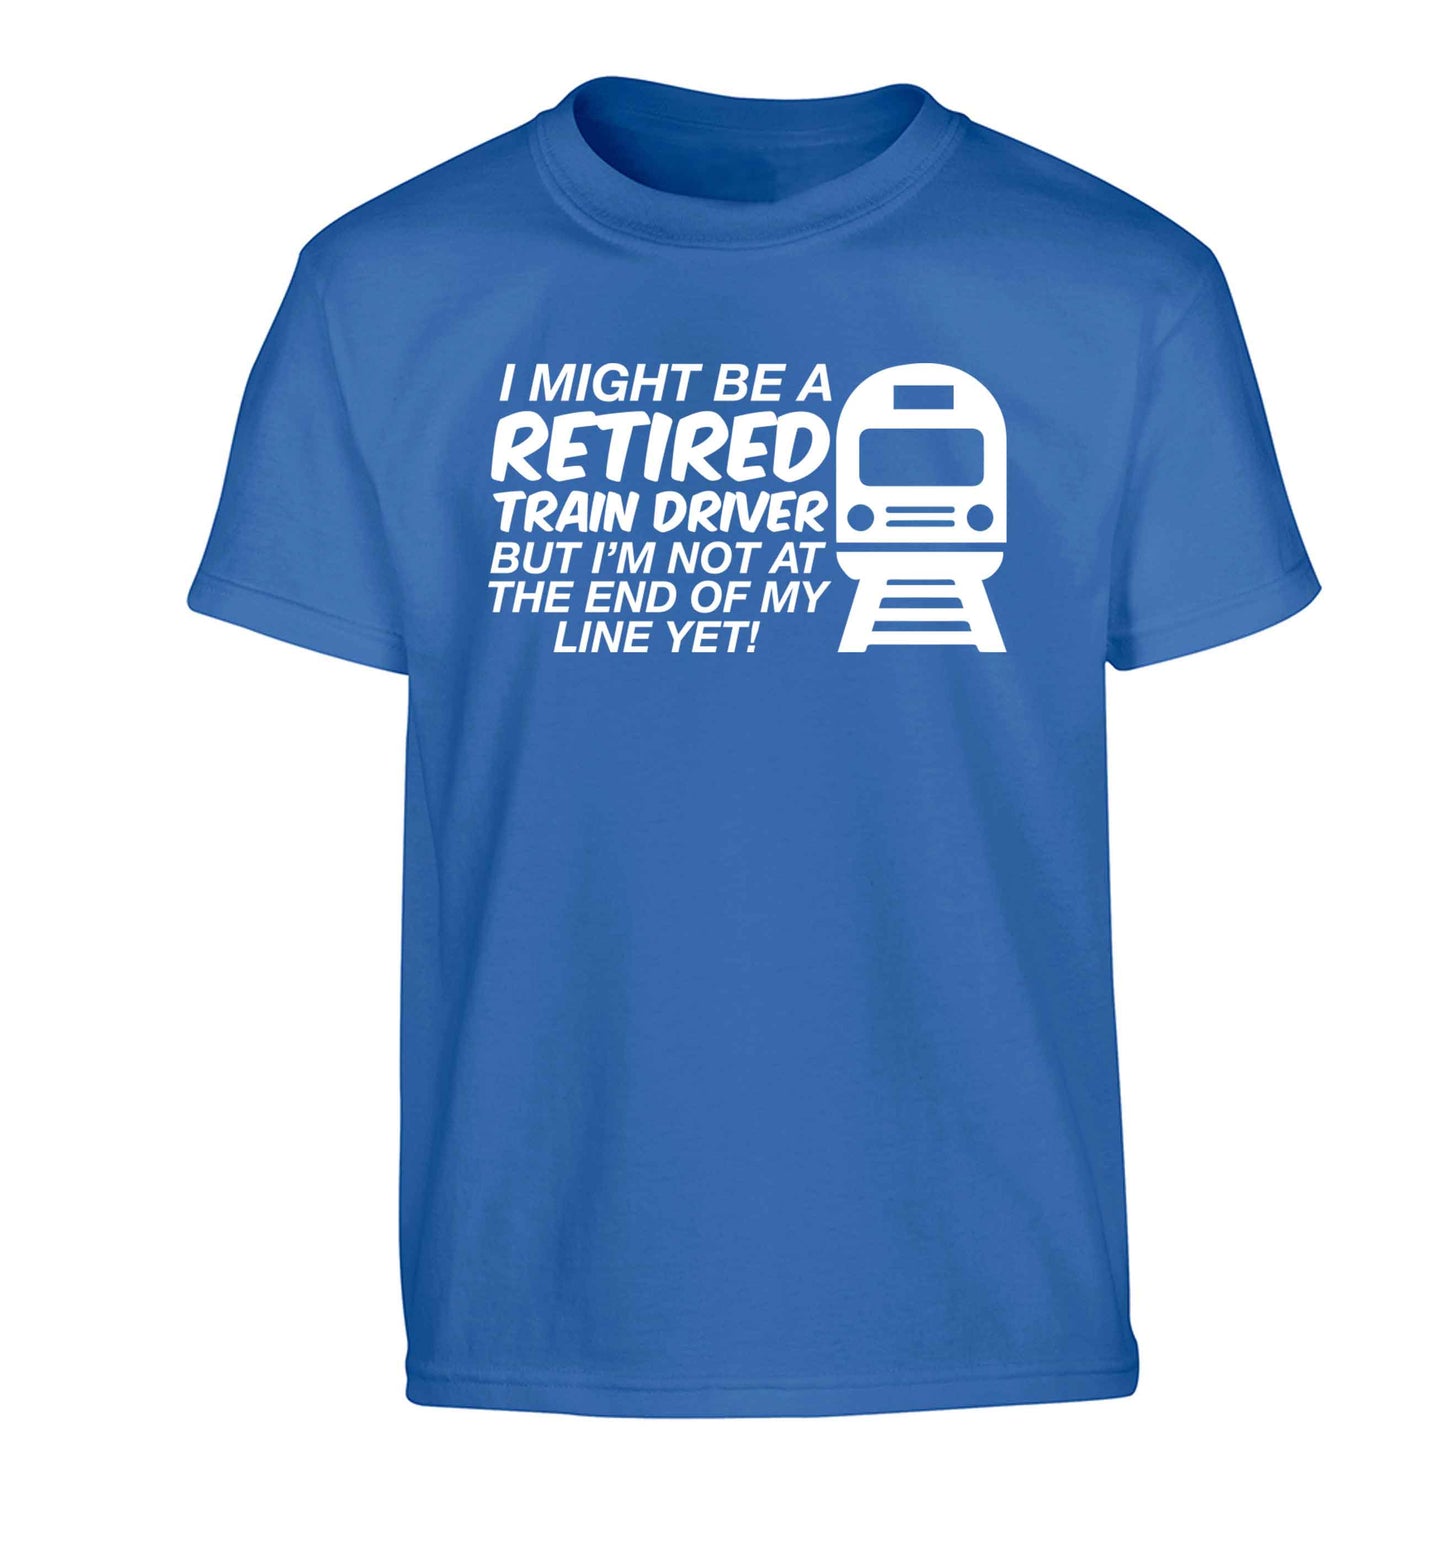 Retired train driver but I'm not at the end of my line yet Children's blue Tshirt 12-13 Years